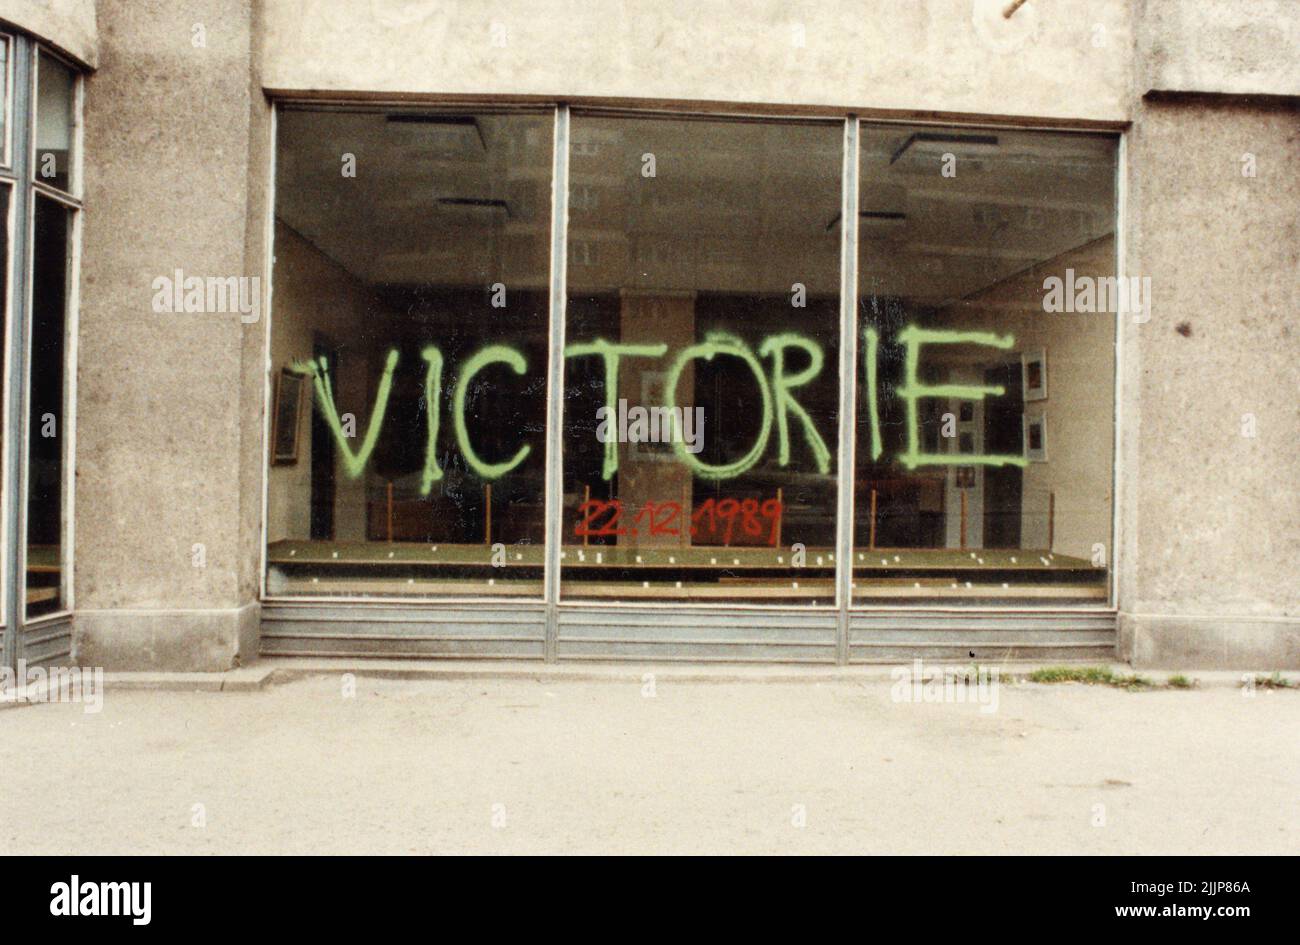 Bucharest, Romania, January 1990. 'Victory! December 22, 1989'- message spray-painted in downtown Bucharest during the anticommunist revolution. Stock Photo